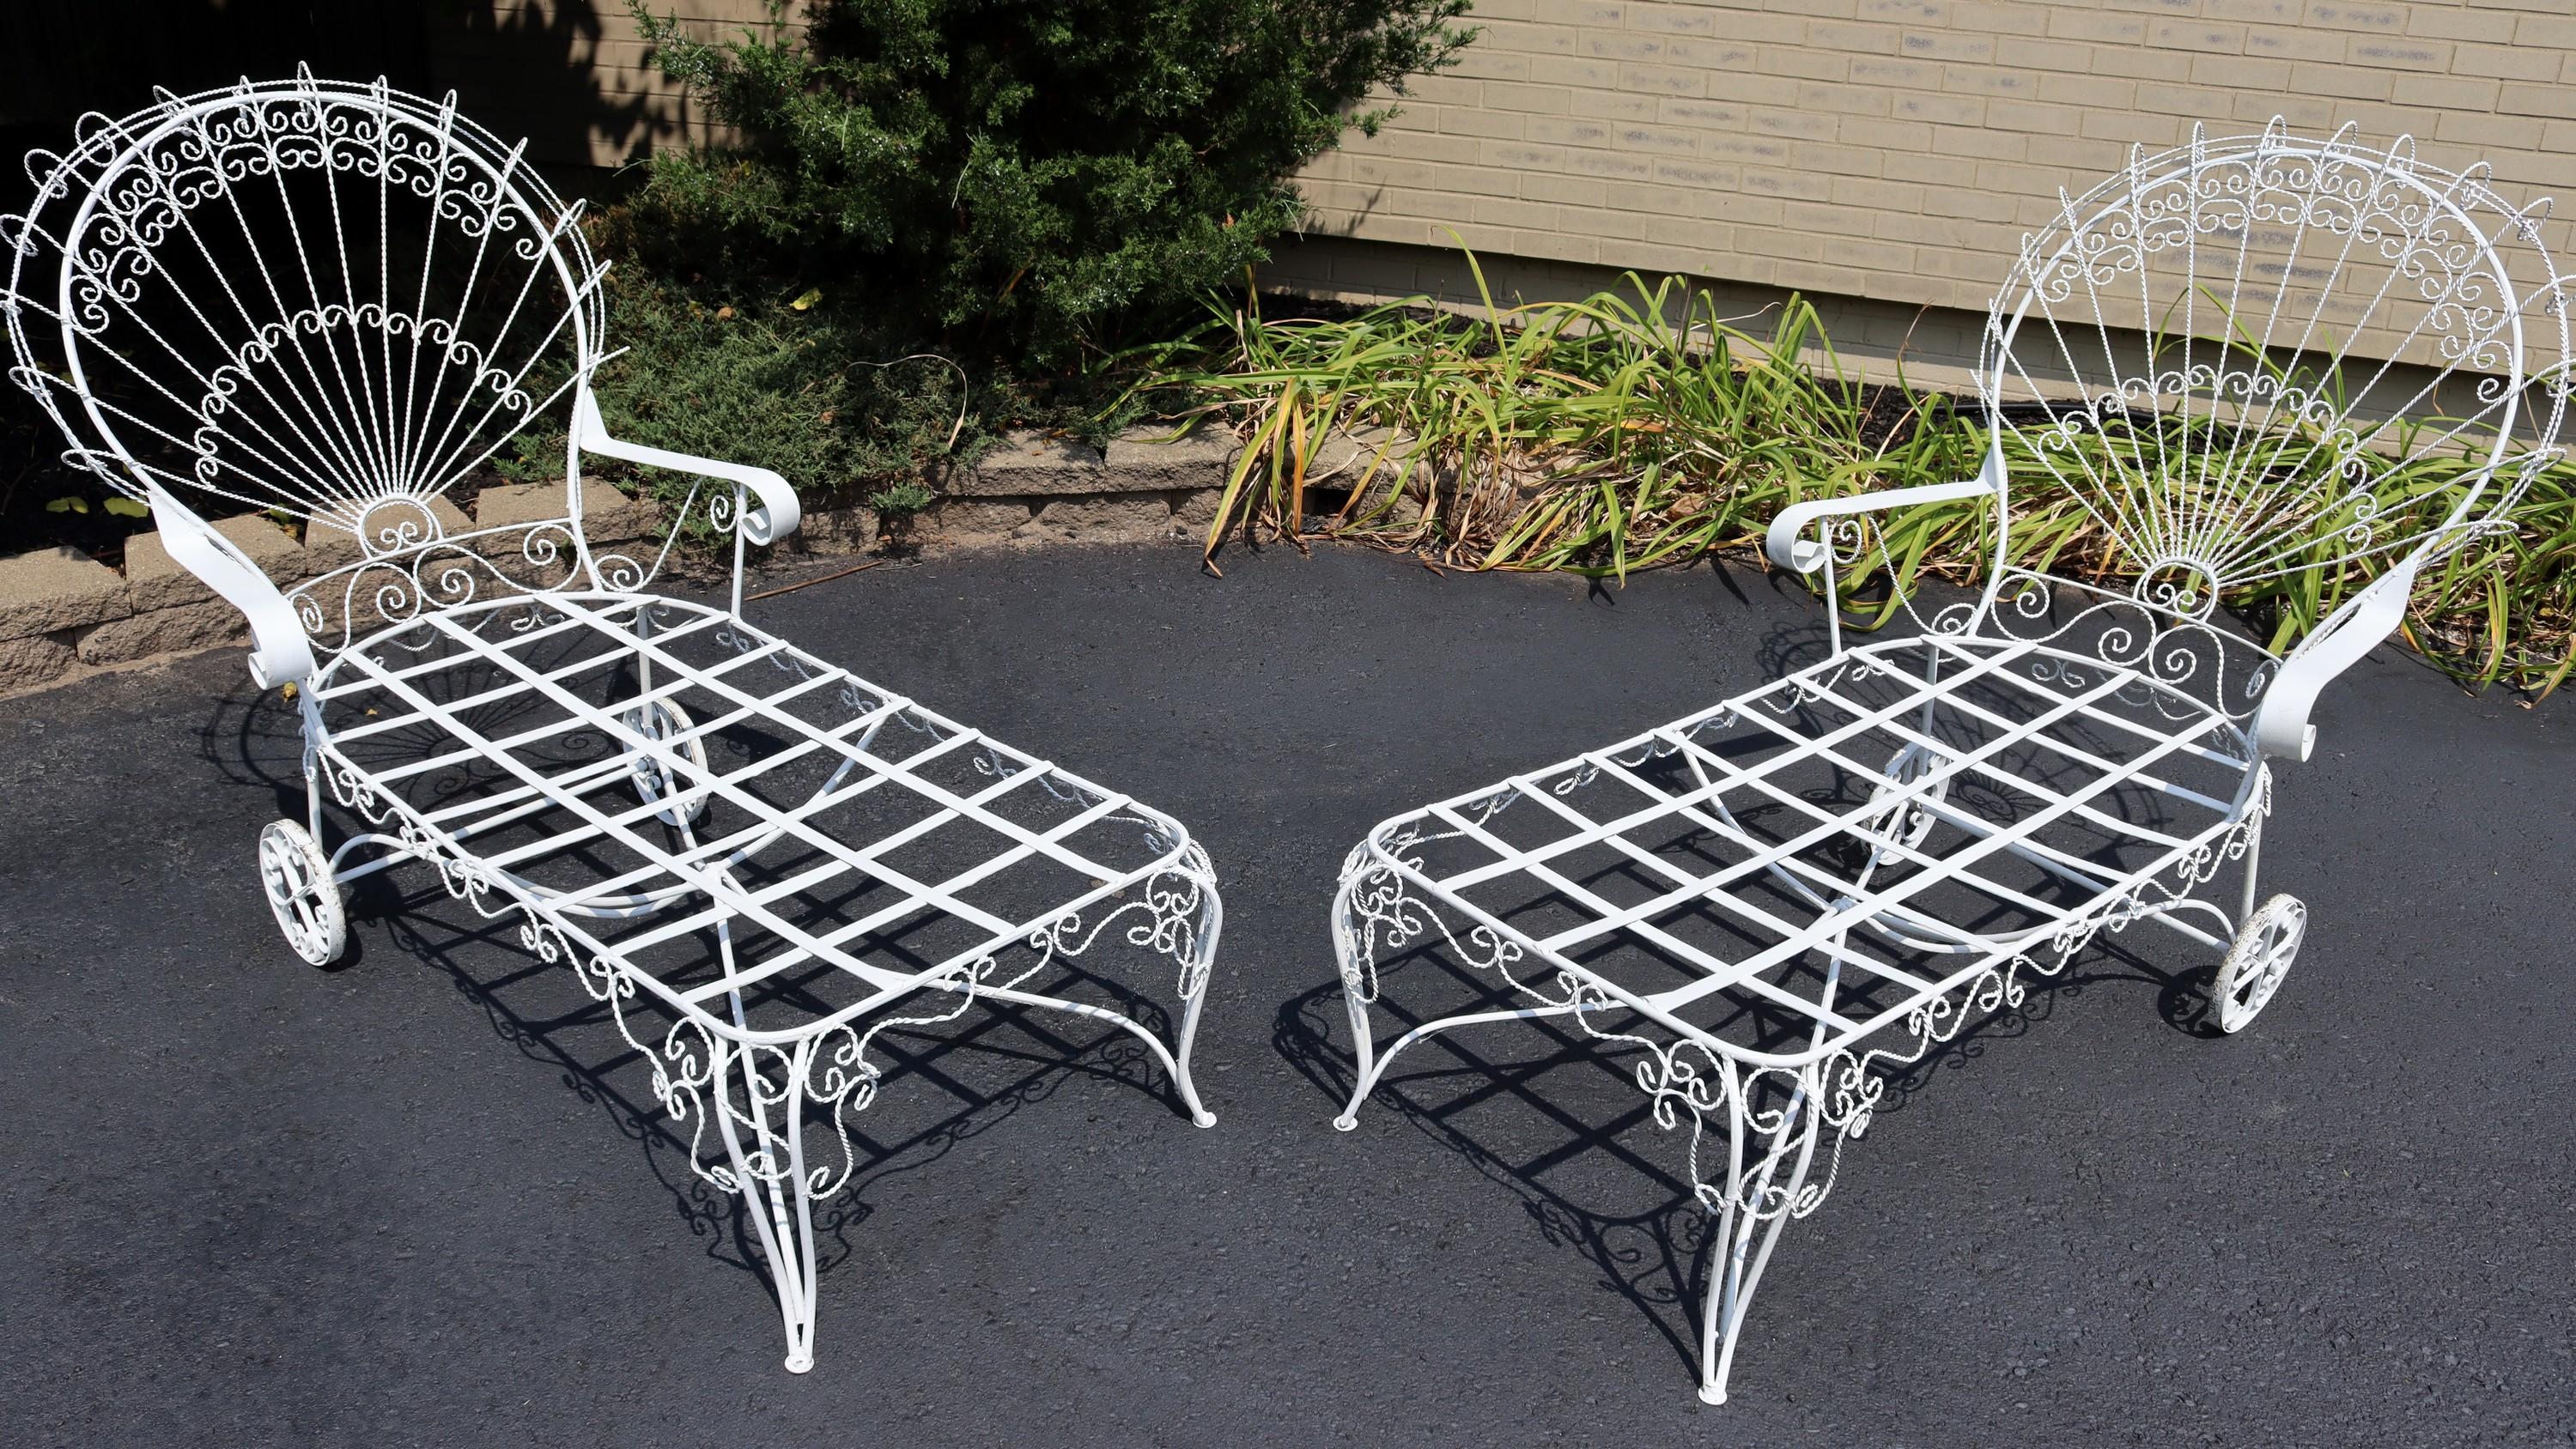 For your consideration is a stupendous, outdoor, twisted wrought iron patio pair of chaise lounges, by Salterini, circa the 1950s. In very good vintage condition. The dimensions are 62